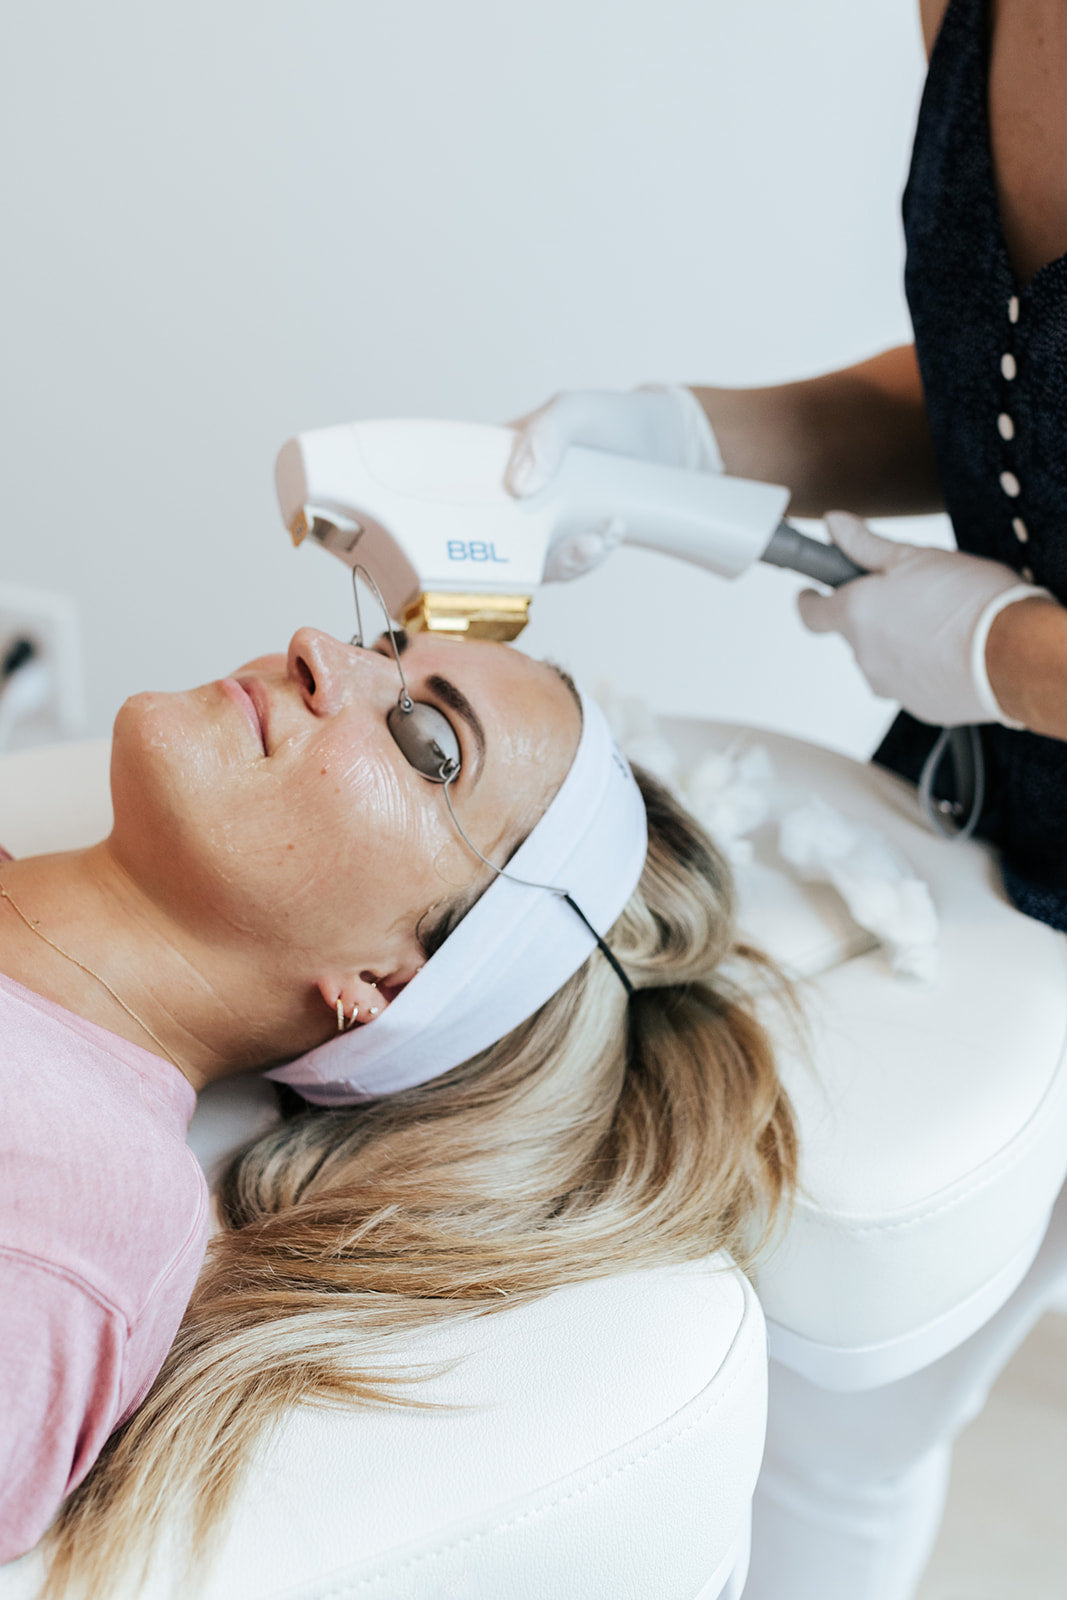 BBL Photofacial: What Is It + How Does It Work?